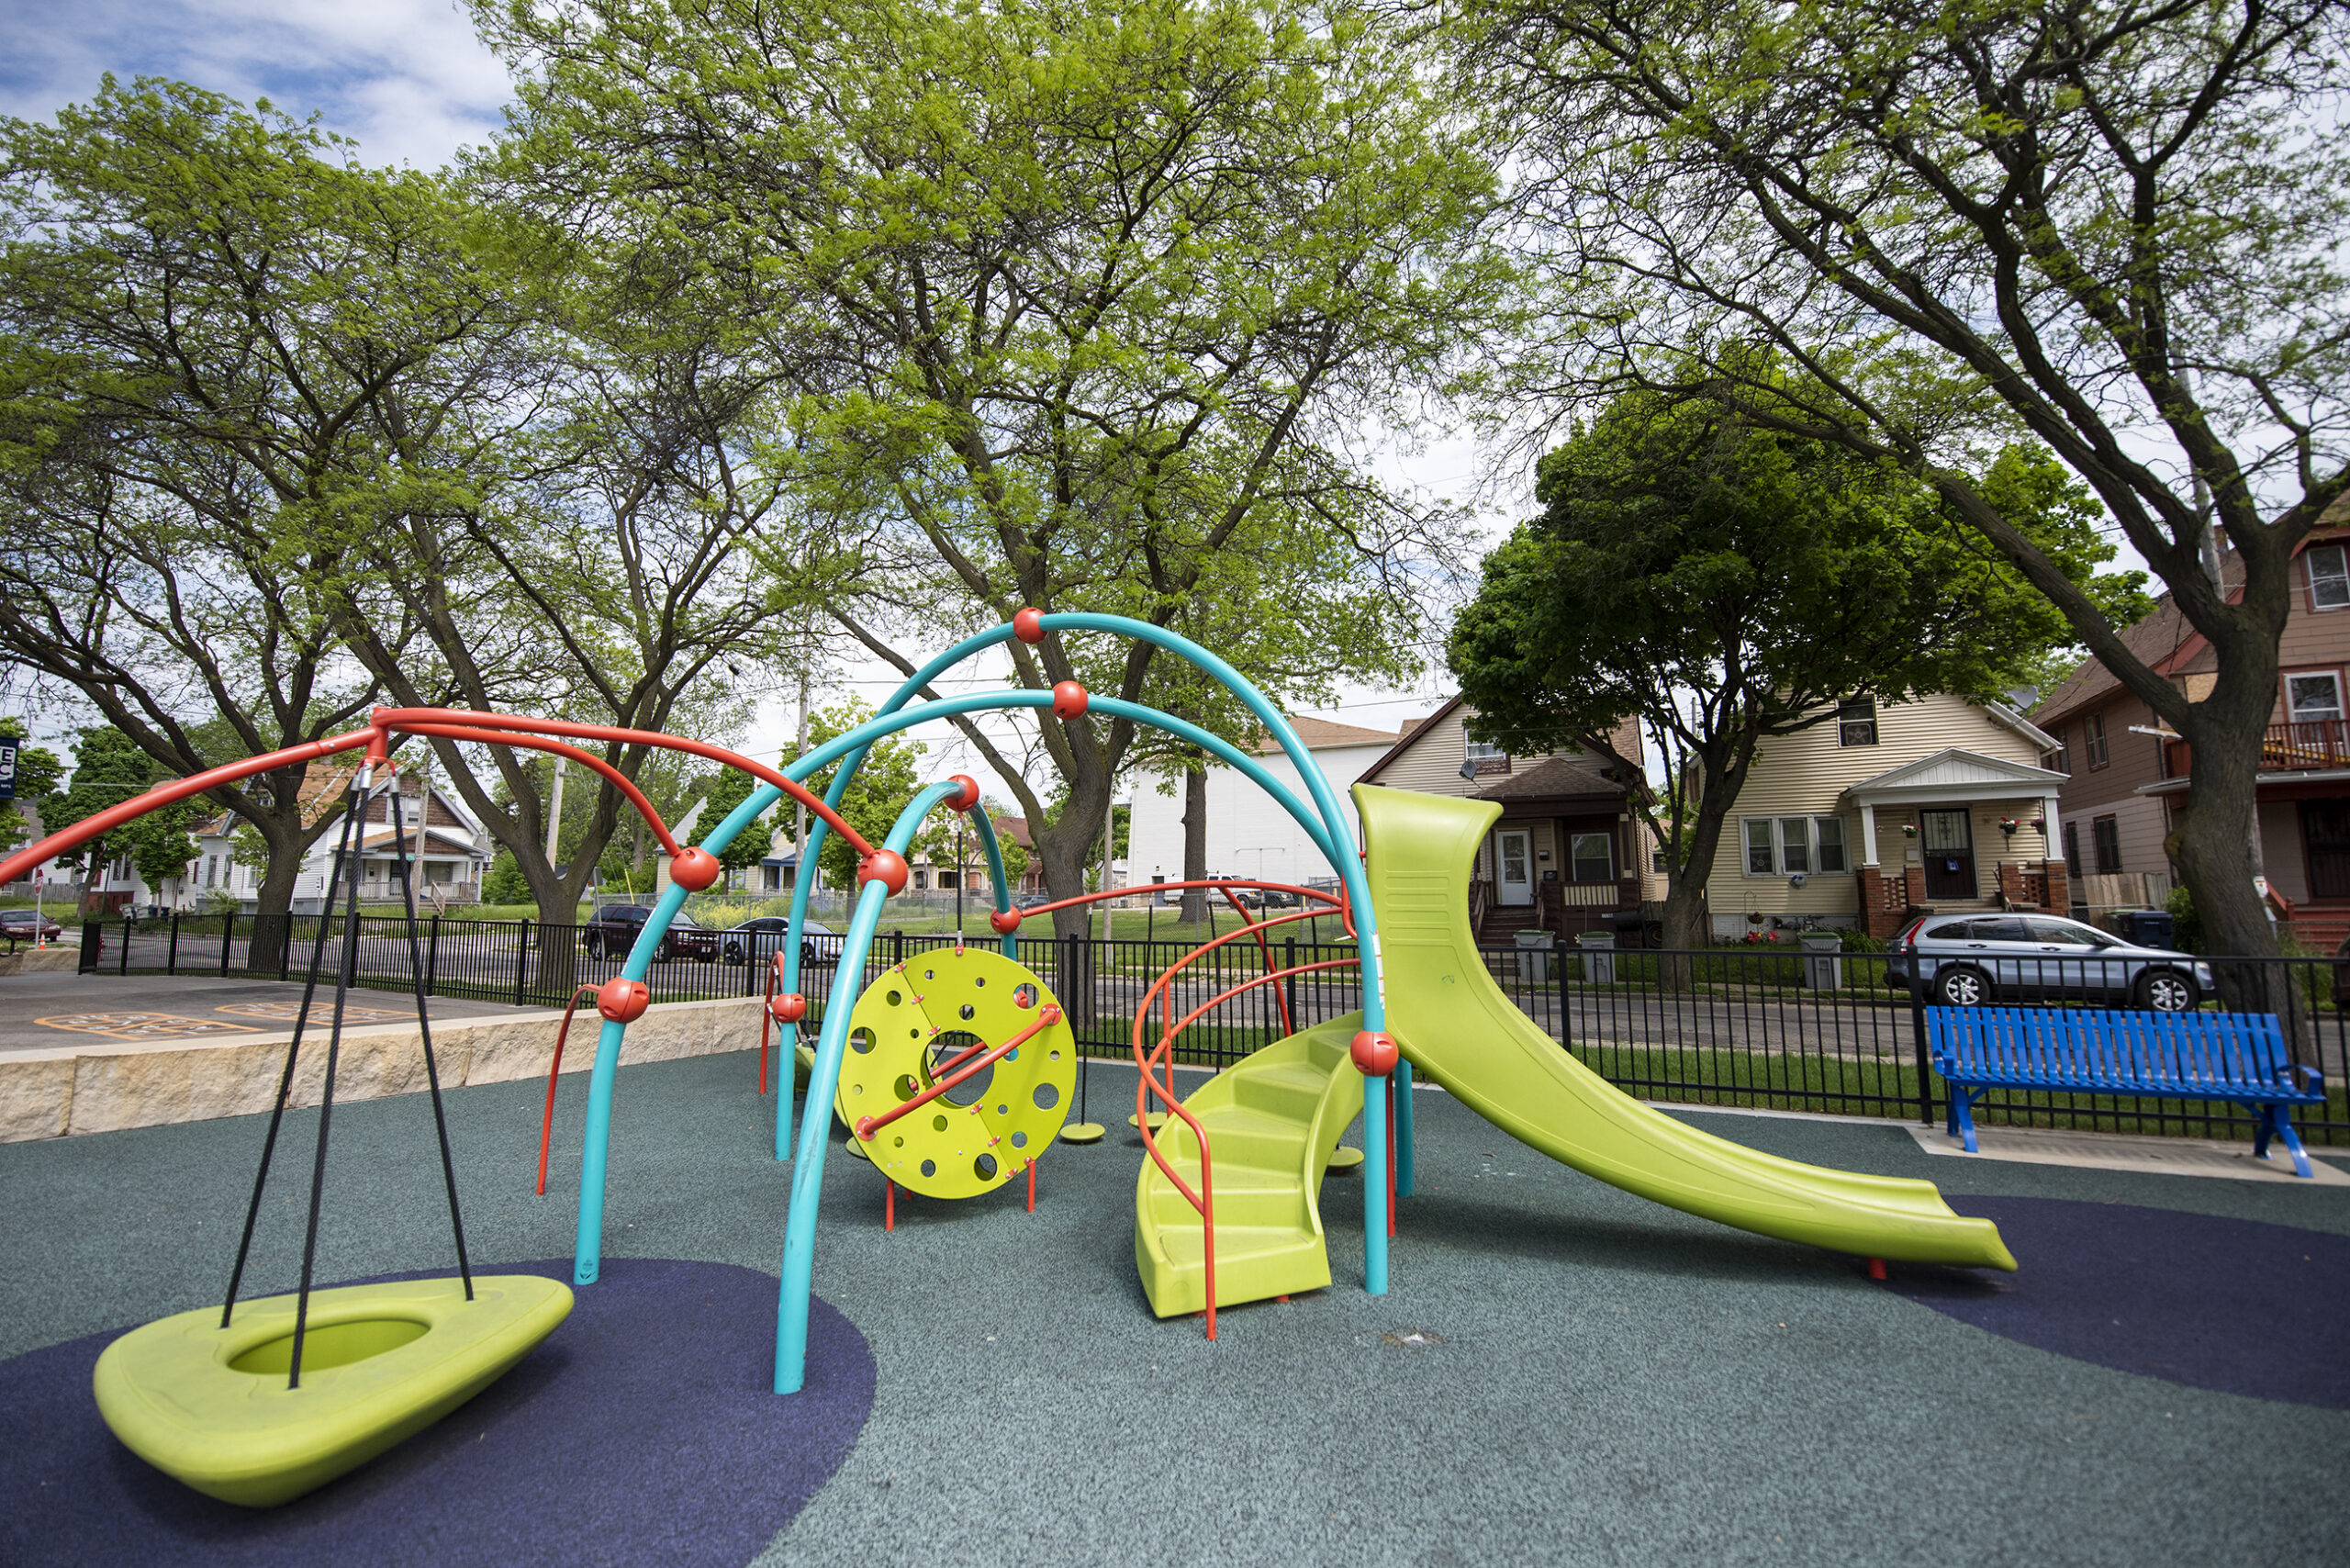 Green, blue and orange playground equipment is backdropped by green trees.